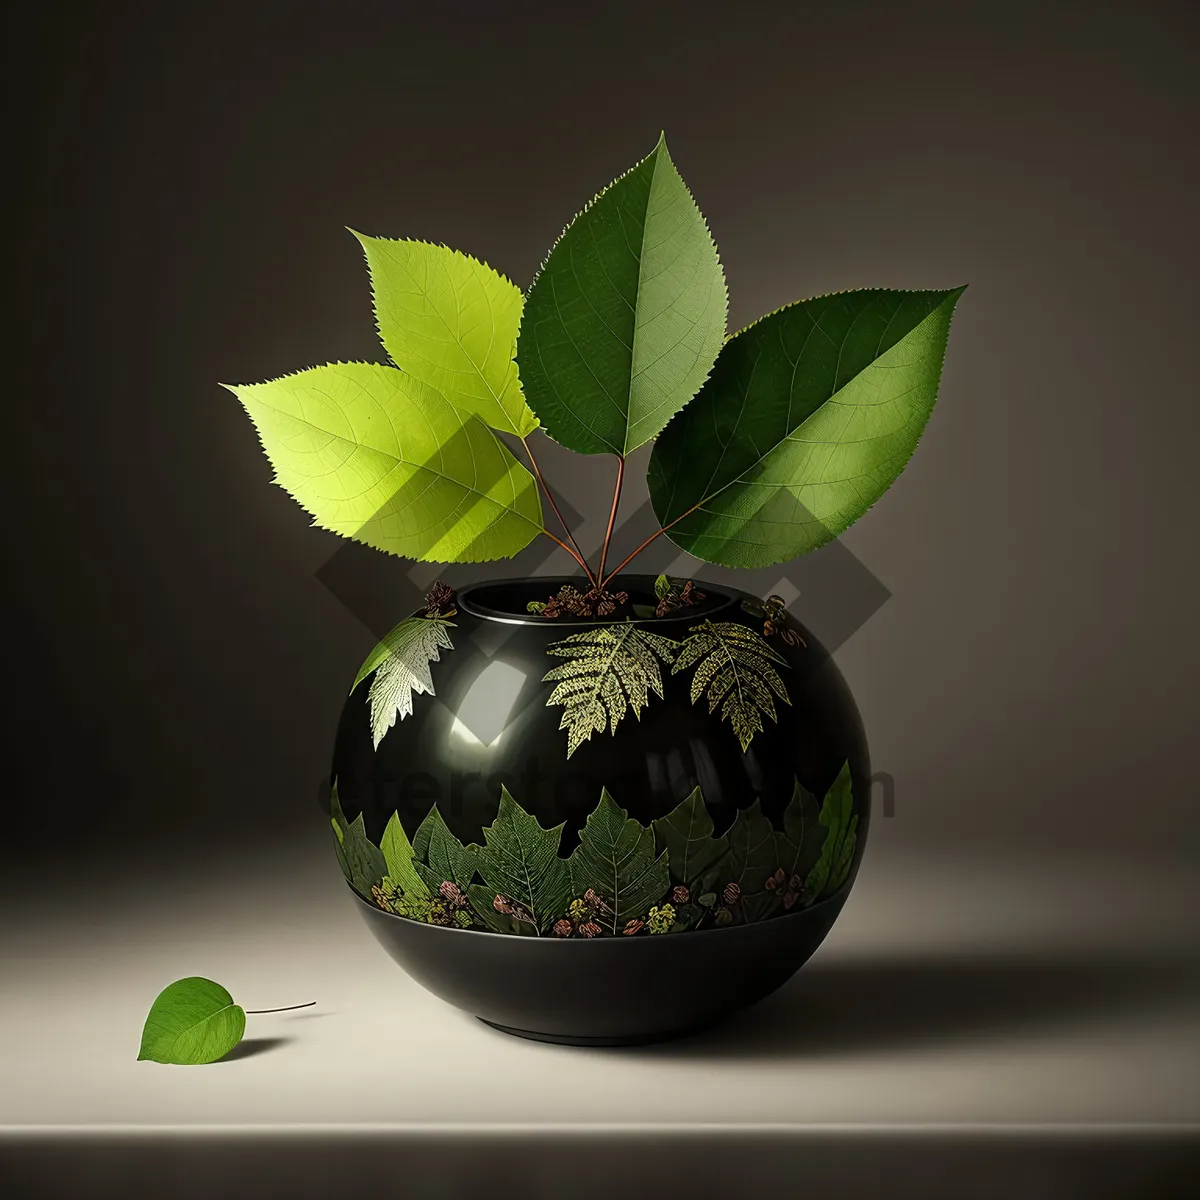 Picture of Earth-inspired Leaf Globe Vase: A Sustainable Plant Container